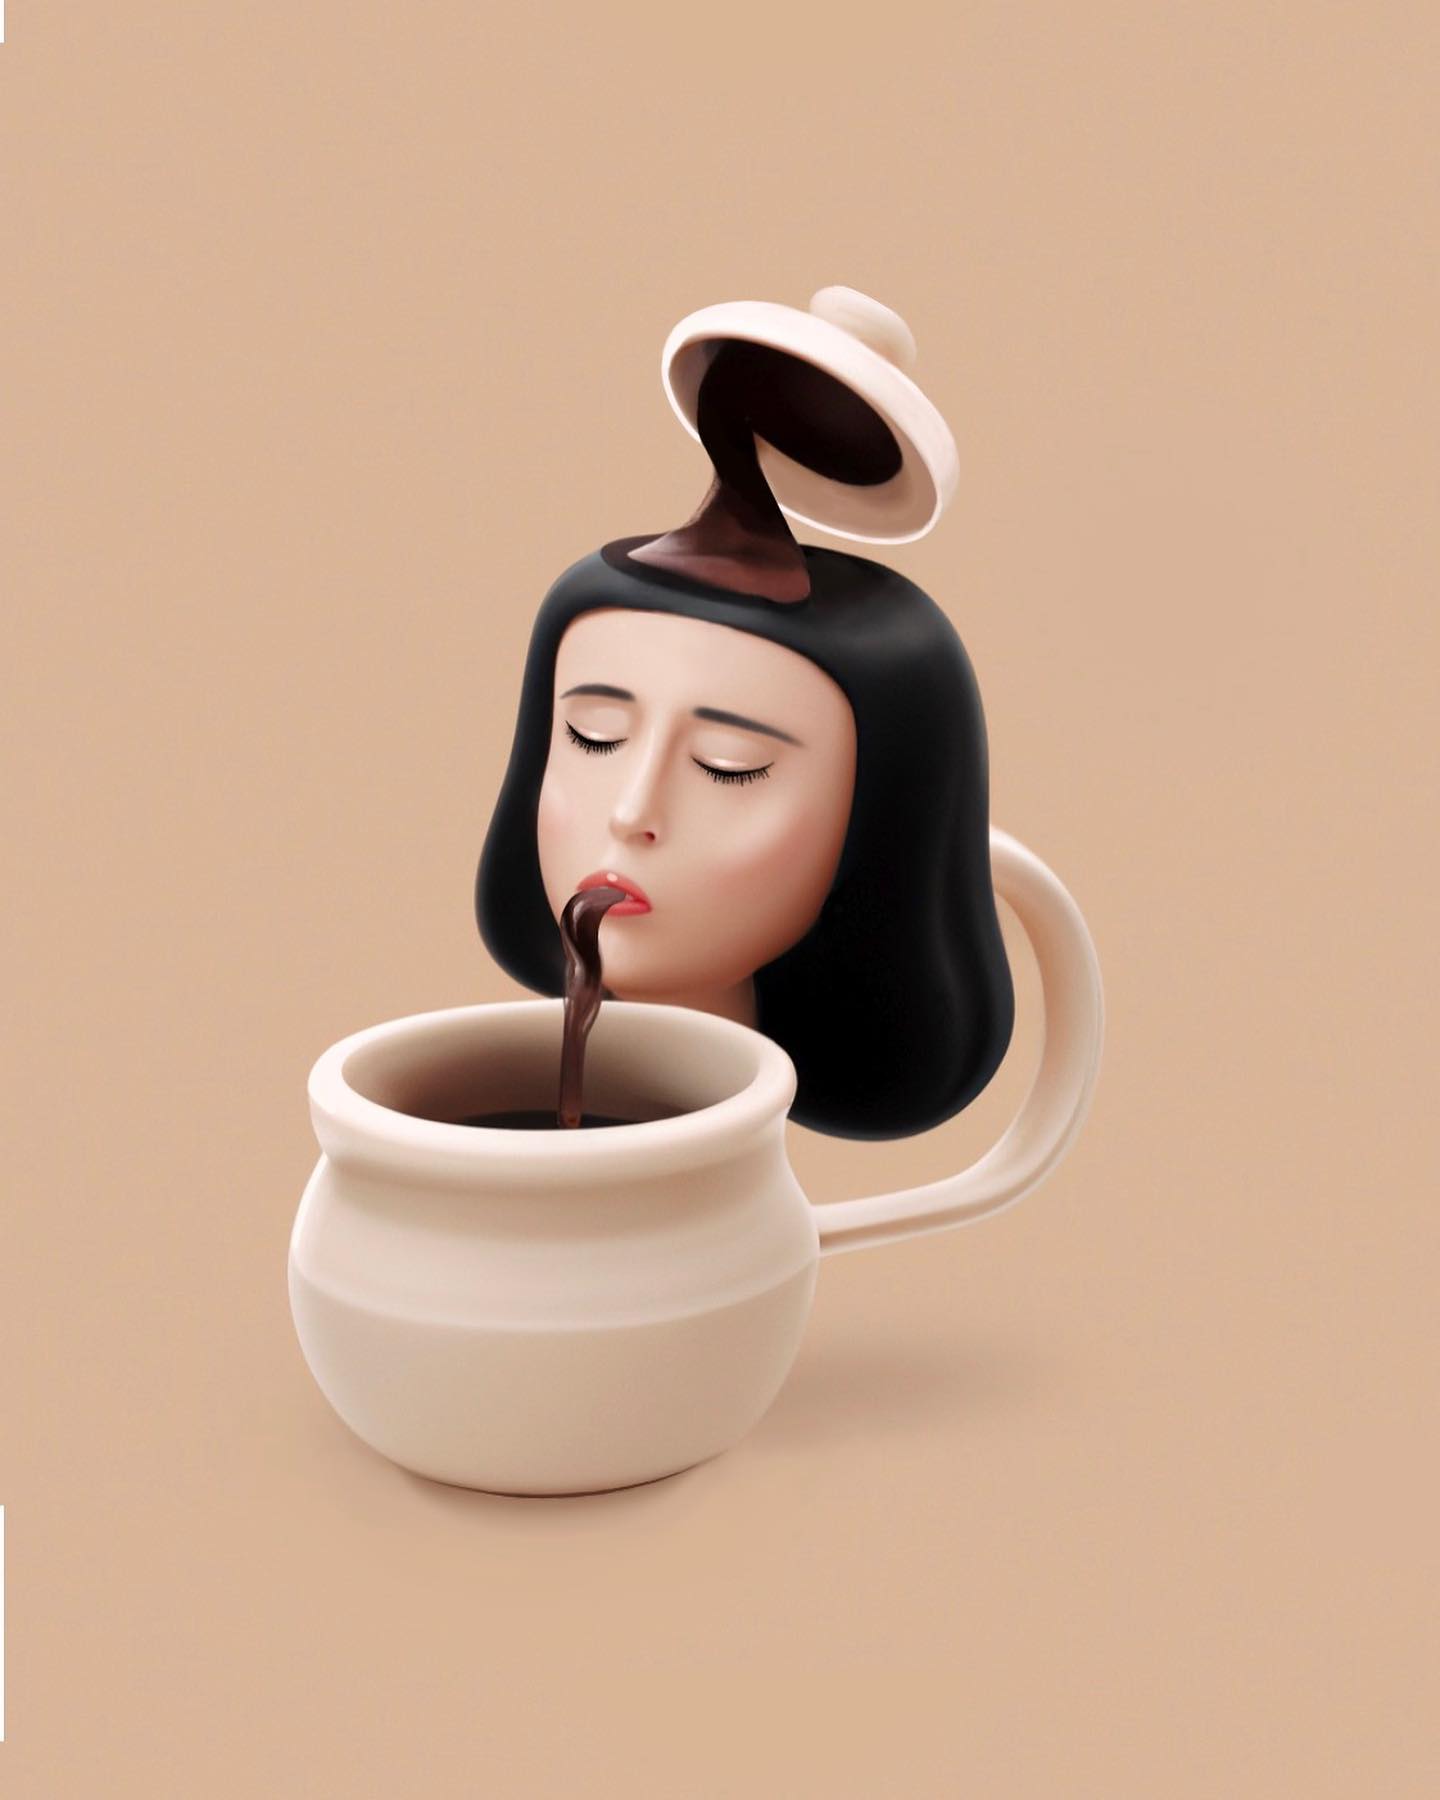 Coffee please. Digital art. Most of the 3D style comes from the generated image, but the face was messed up in a pretty horrible way.